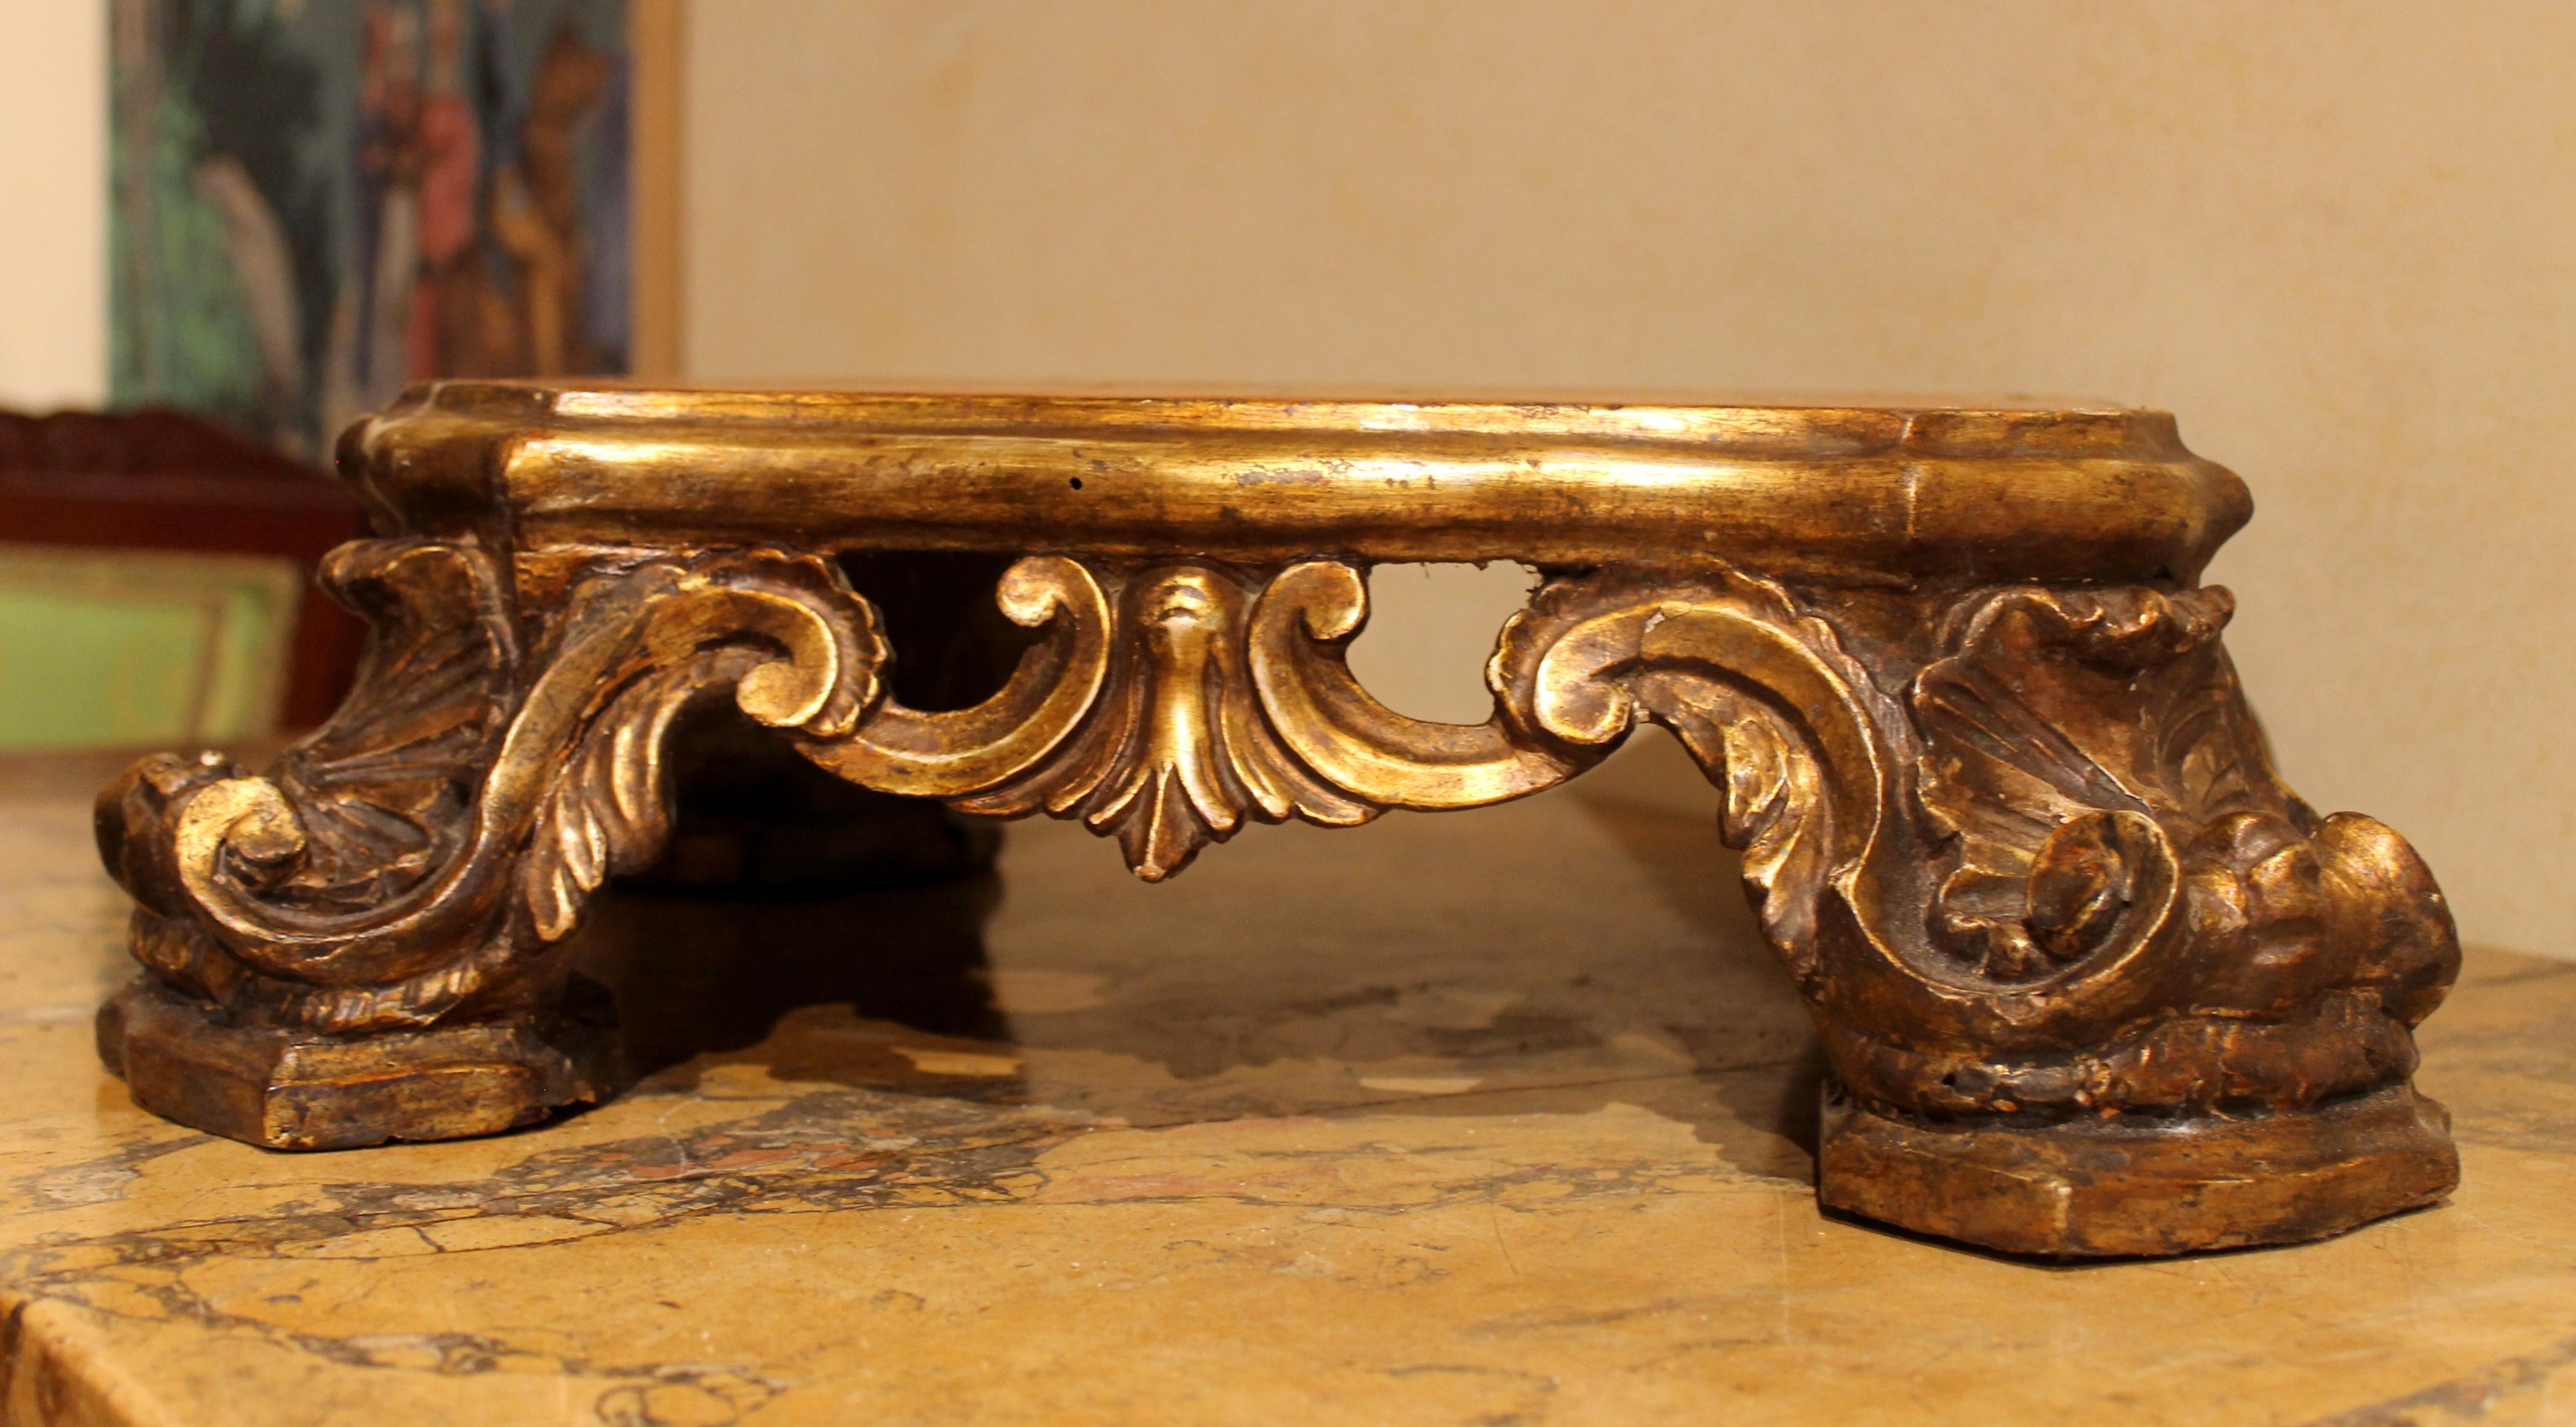 Hand-Carved Italian Baroque Period Hand Carved, Gilded and Lacquered Wooden Base or Stand